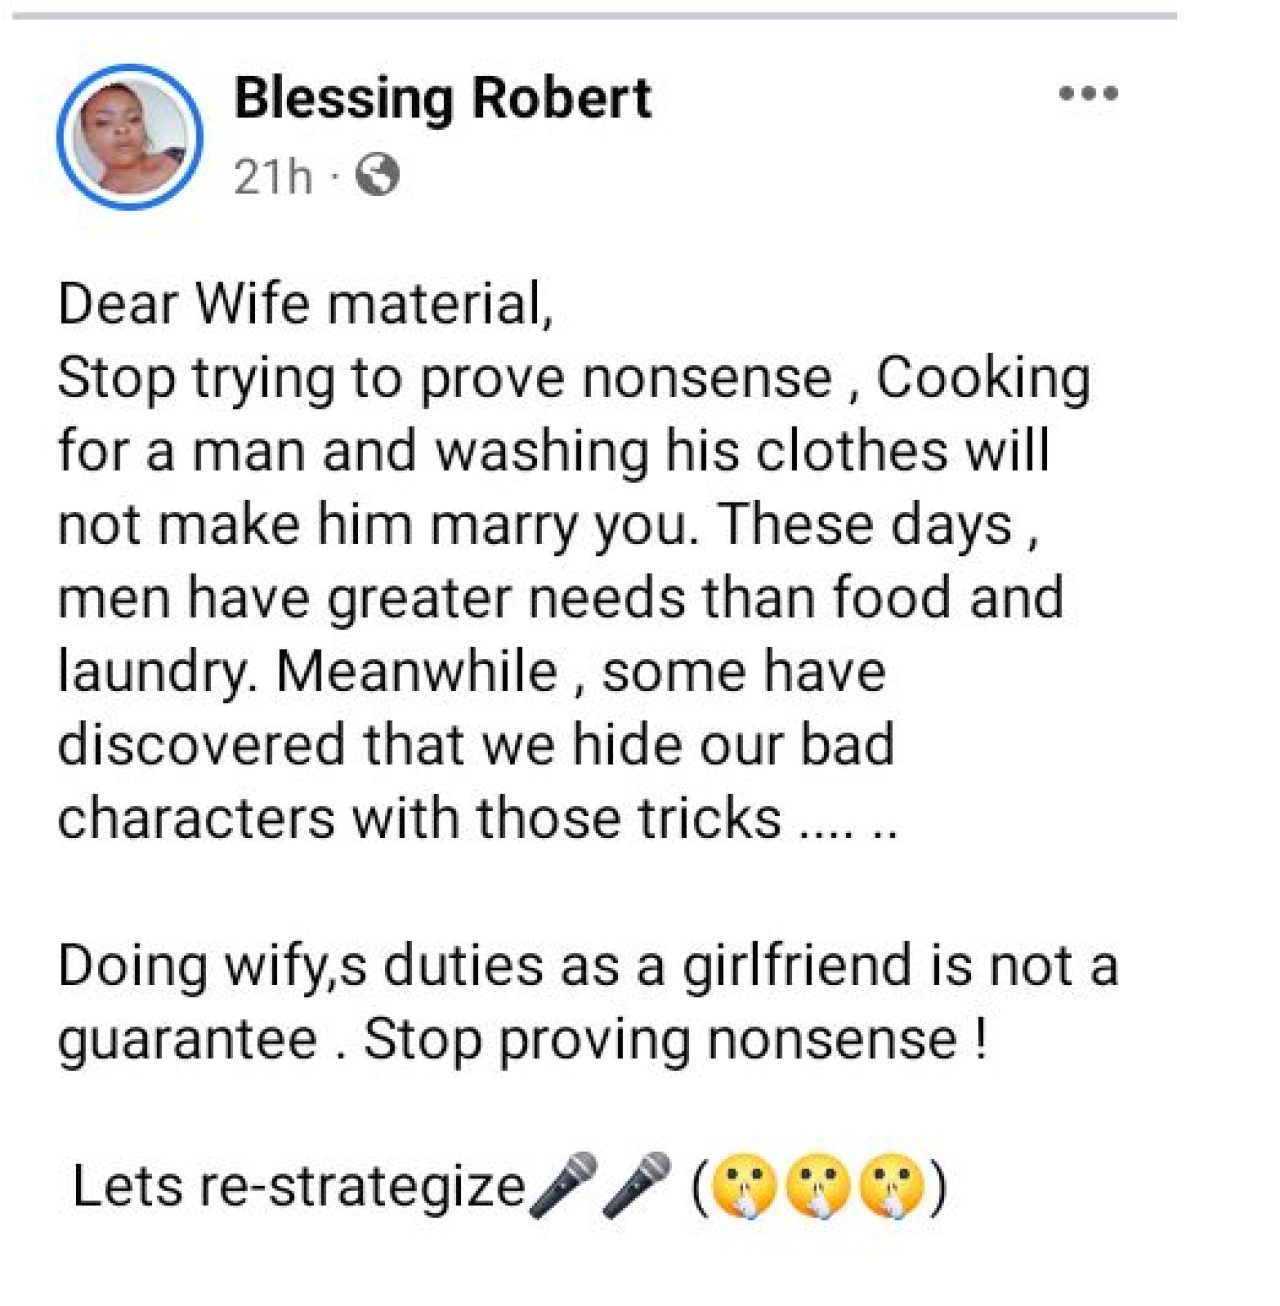 "Guys have realized that we conceal our negative traits with ploys like cooking and doing laundry; - Nigerian lady advises 'wife material' to re-strategize. AdvertAfrica News on afronewswire.com: Amplifying Africa's Voice | afronewswire.com | Breaking News & Stories